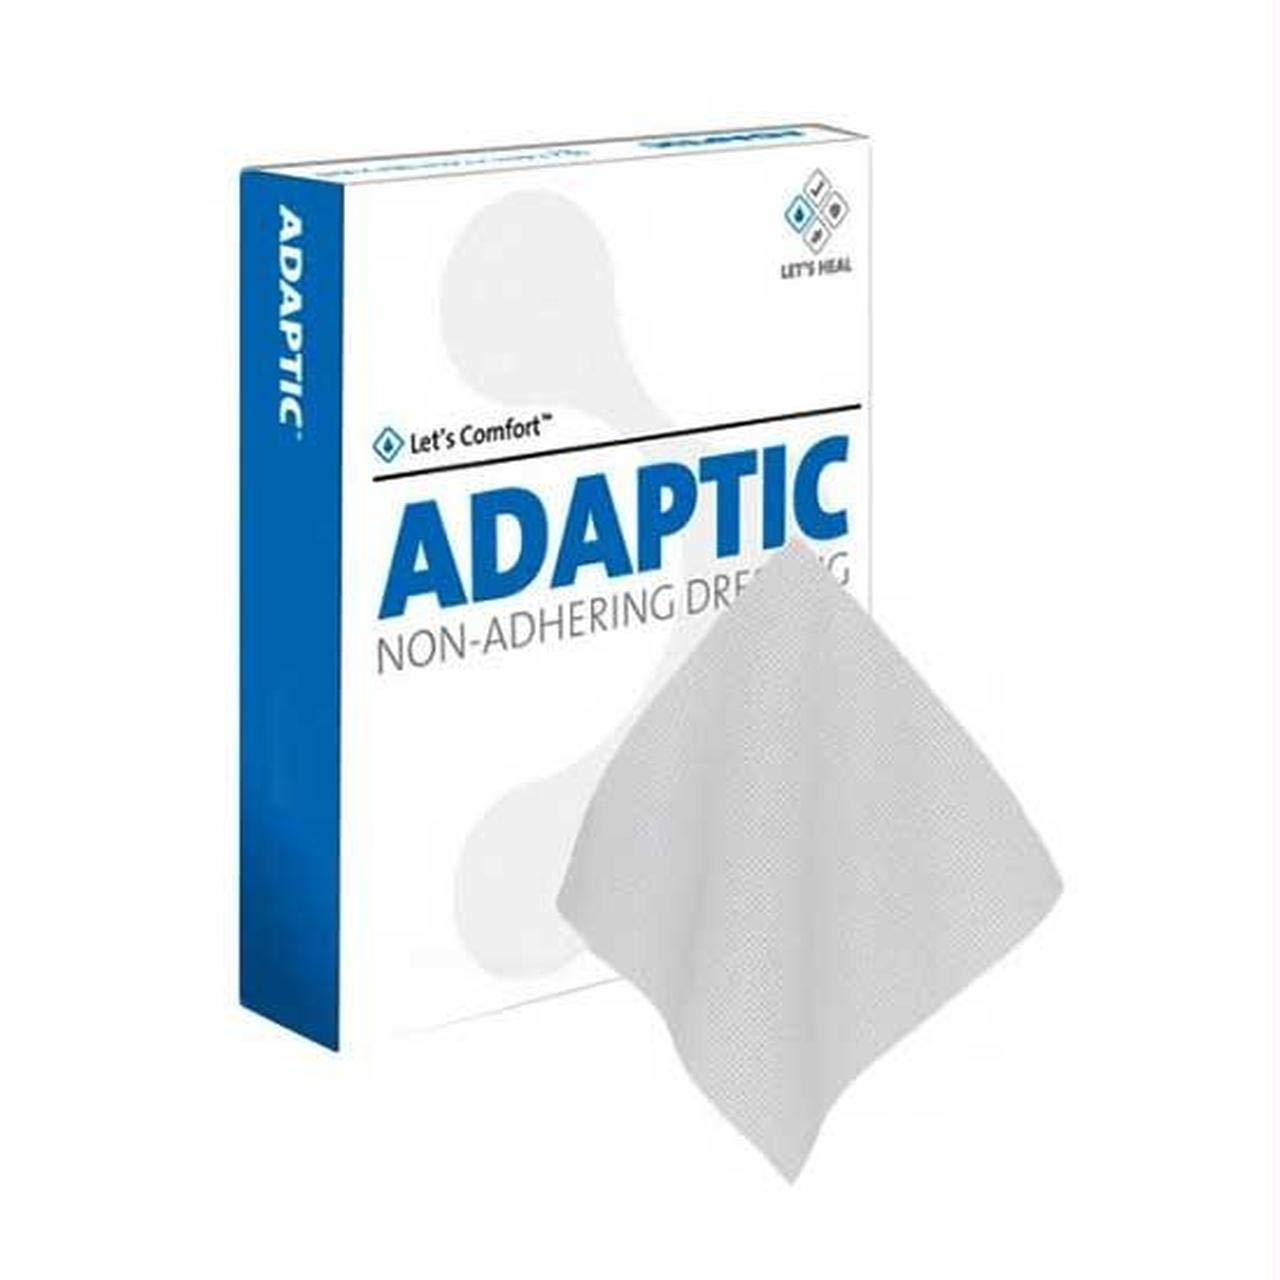 Adaptic Non Adhesive Dressing, Sterile 3 x 8 - image 2 of 2